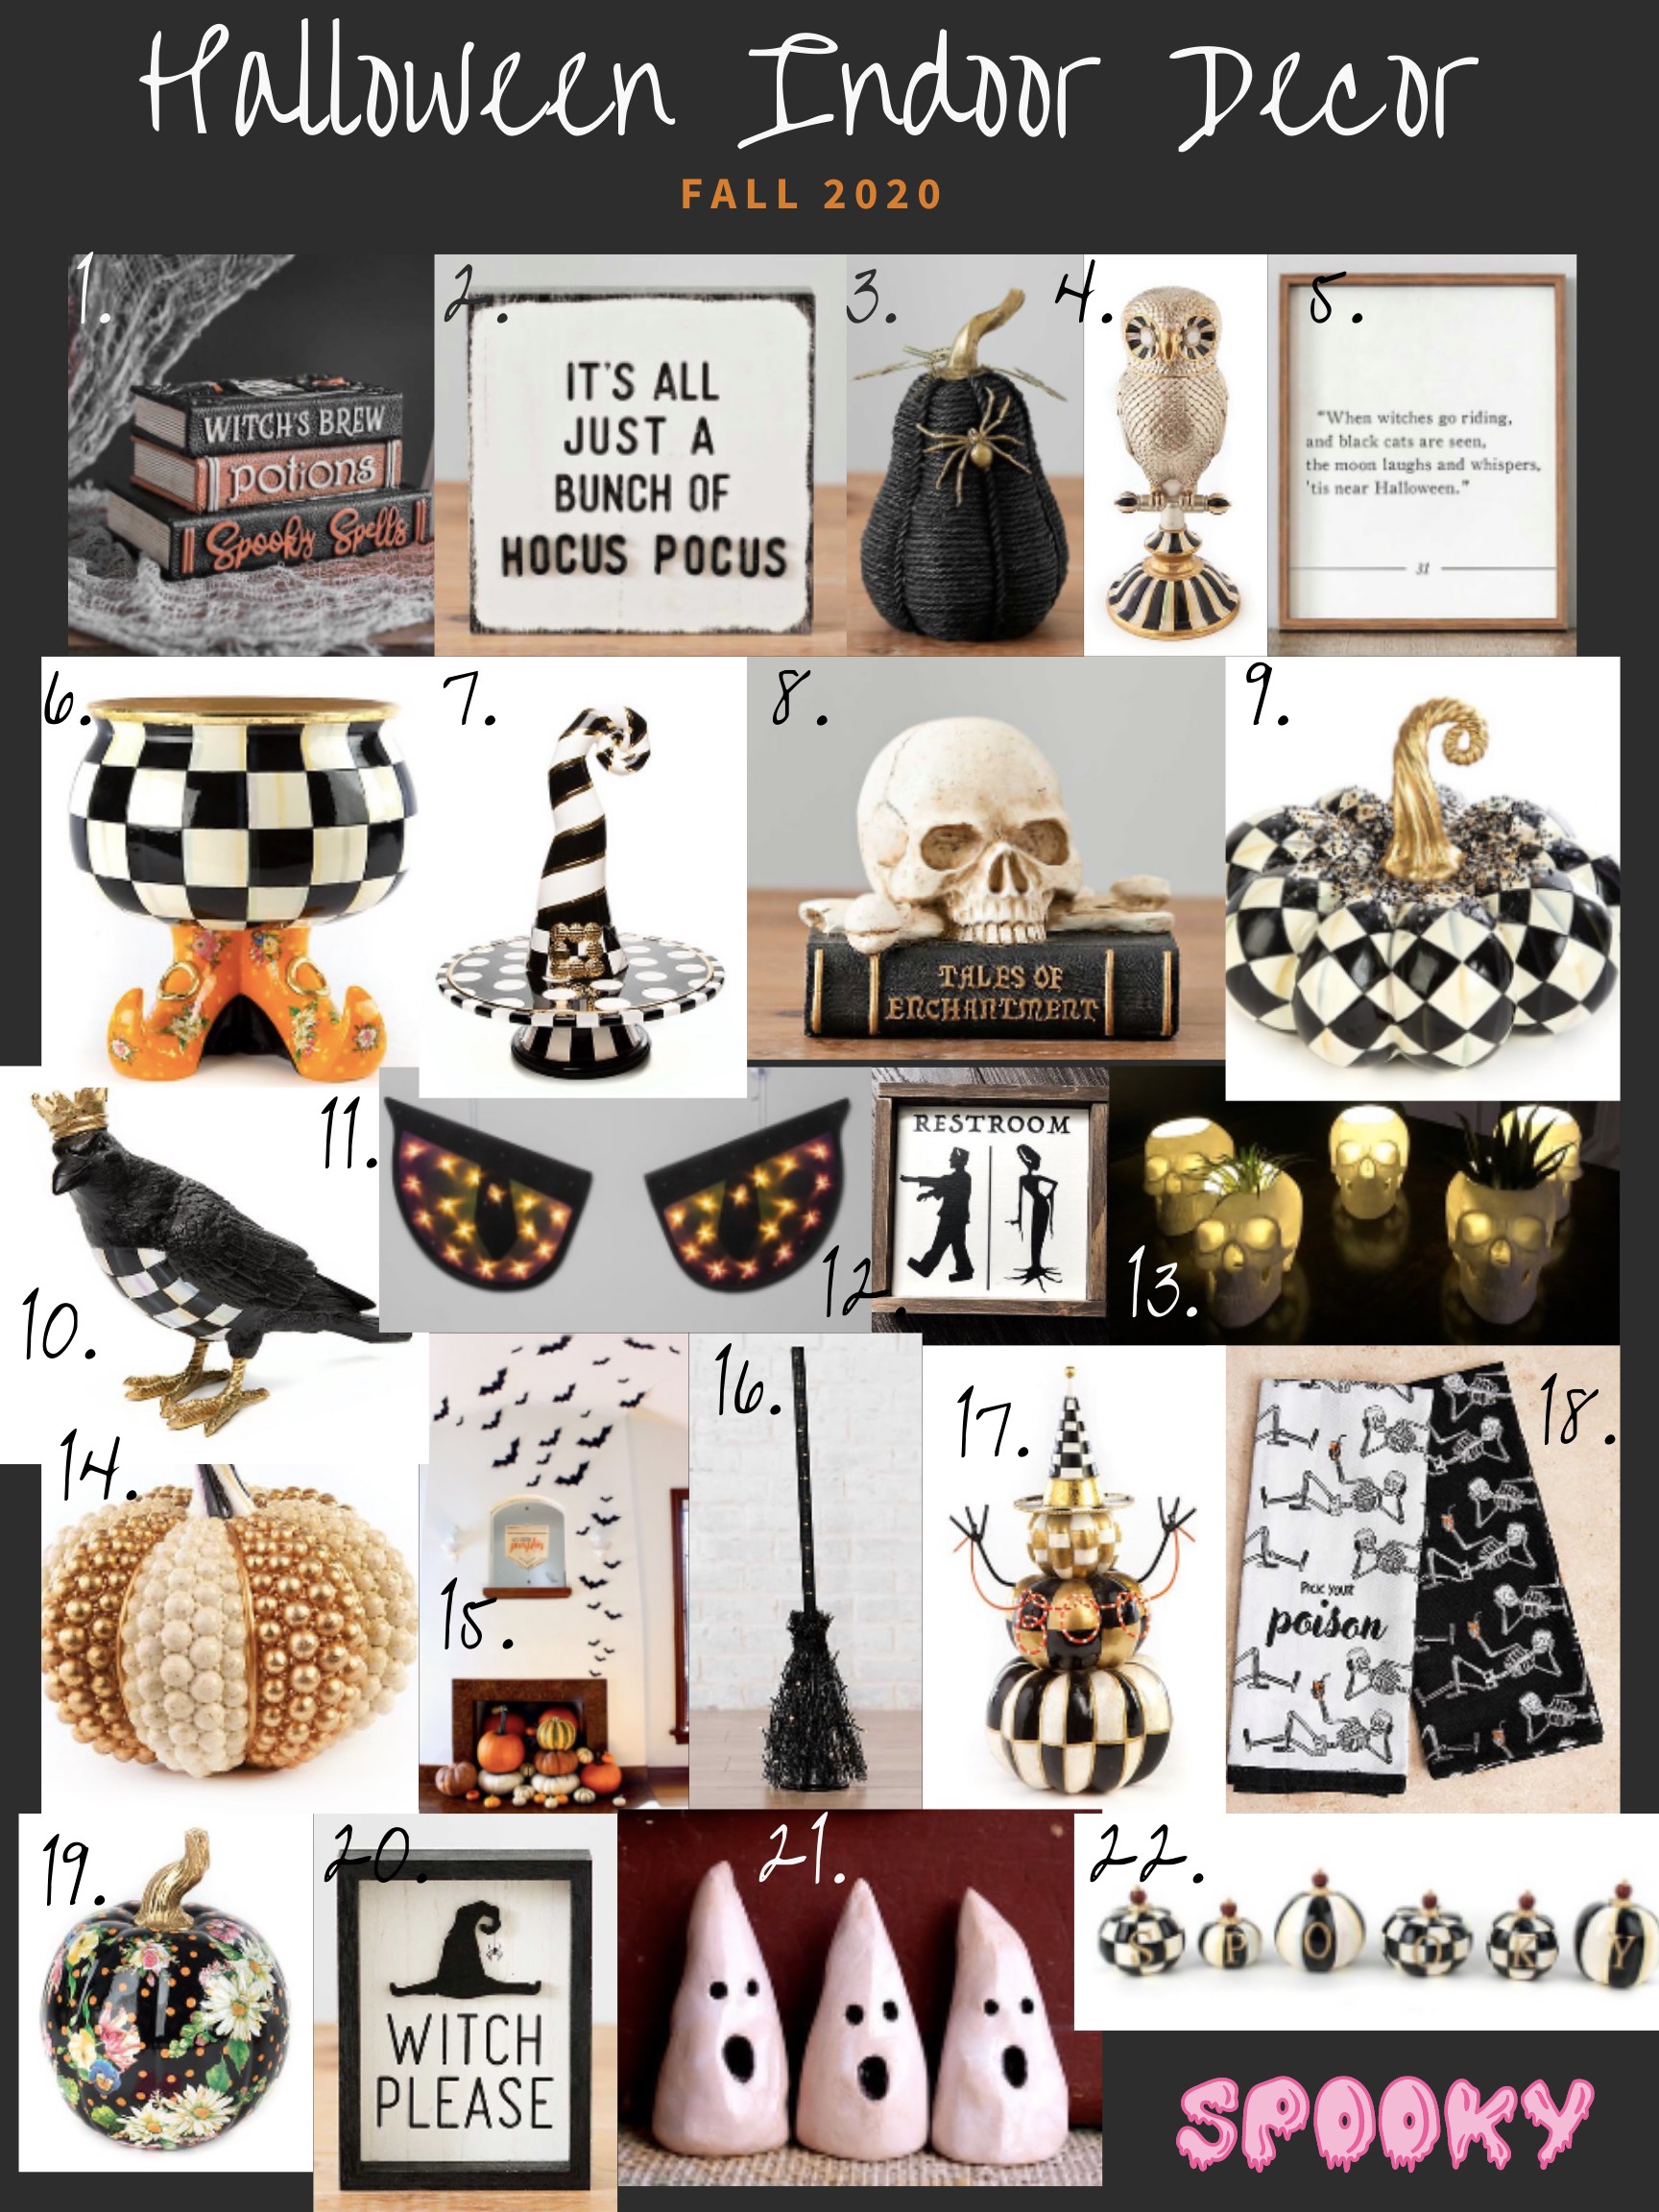 Best Halloween Decorations by popular Nashville life and style blog, Nashville Wifestyles: collage image of black and white checkered pumpkin, skeleton tea towels, Witch Please sign, ghost decor, owl decor, spooky sign, 3D bats, and spell book decor.